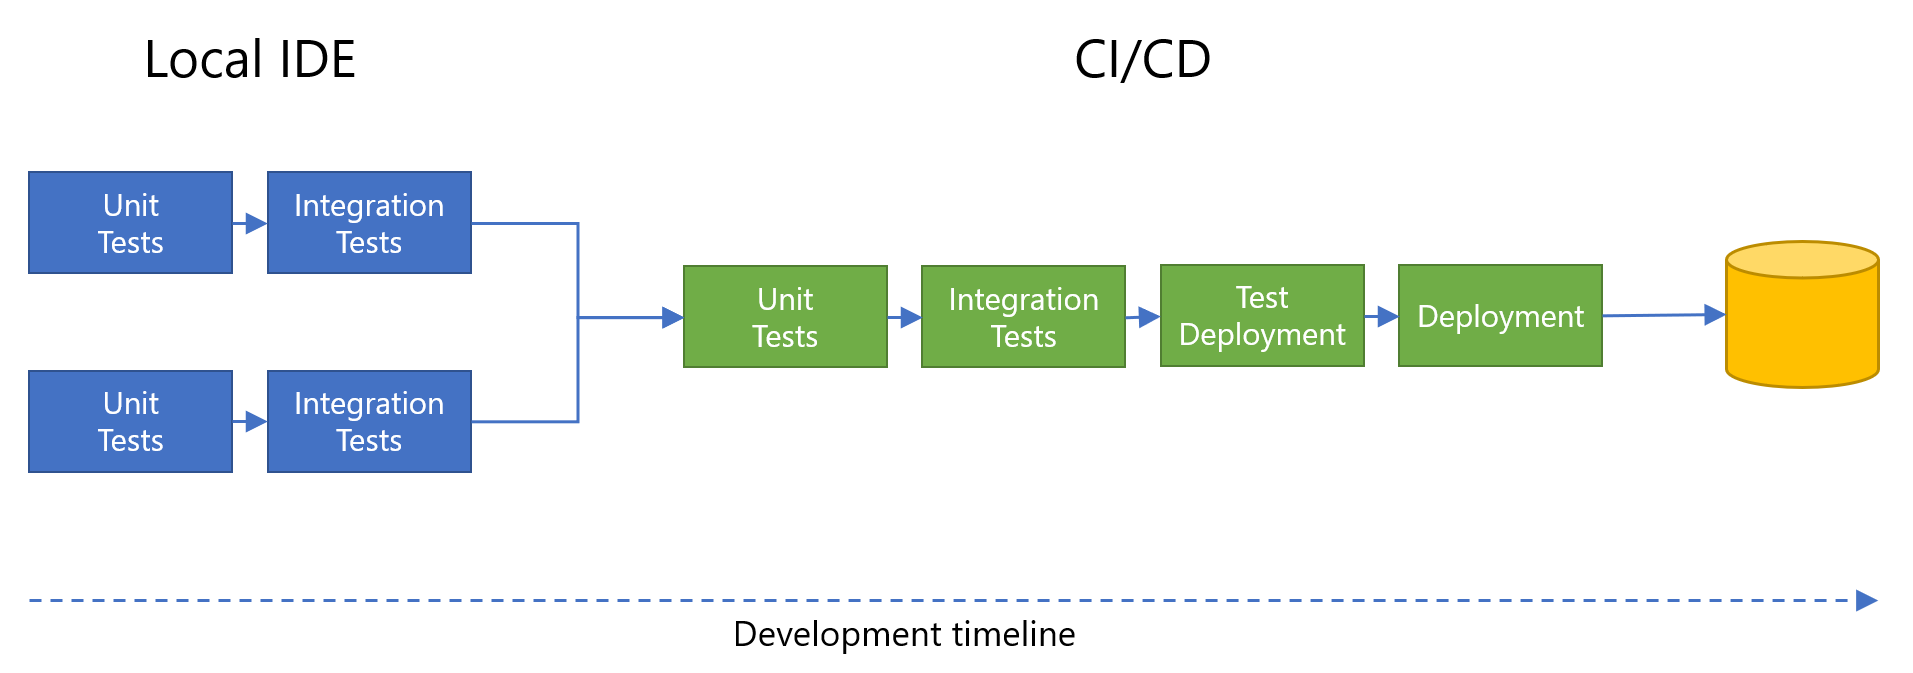 Diagram shows two sets of unit tests and integration tests in parallel on local I D E, which merge in the C I / C D development flow into unit tests, then integration tests, then test deployment, then deployment.